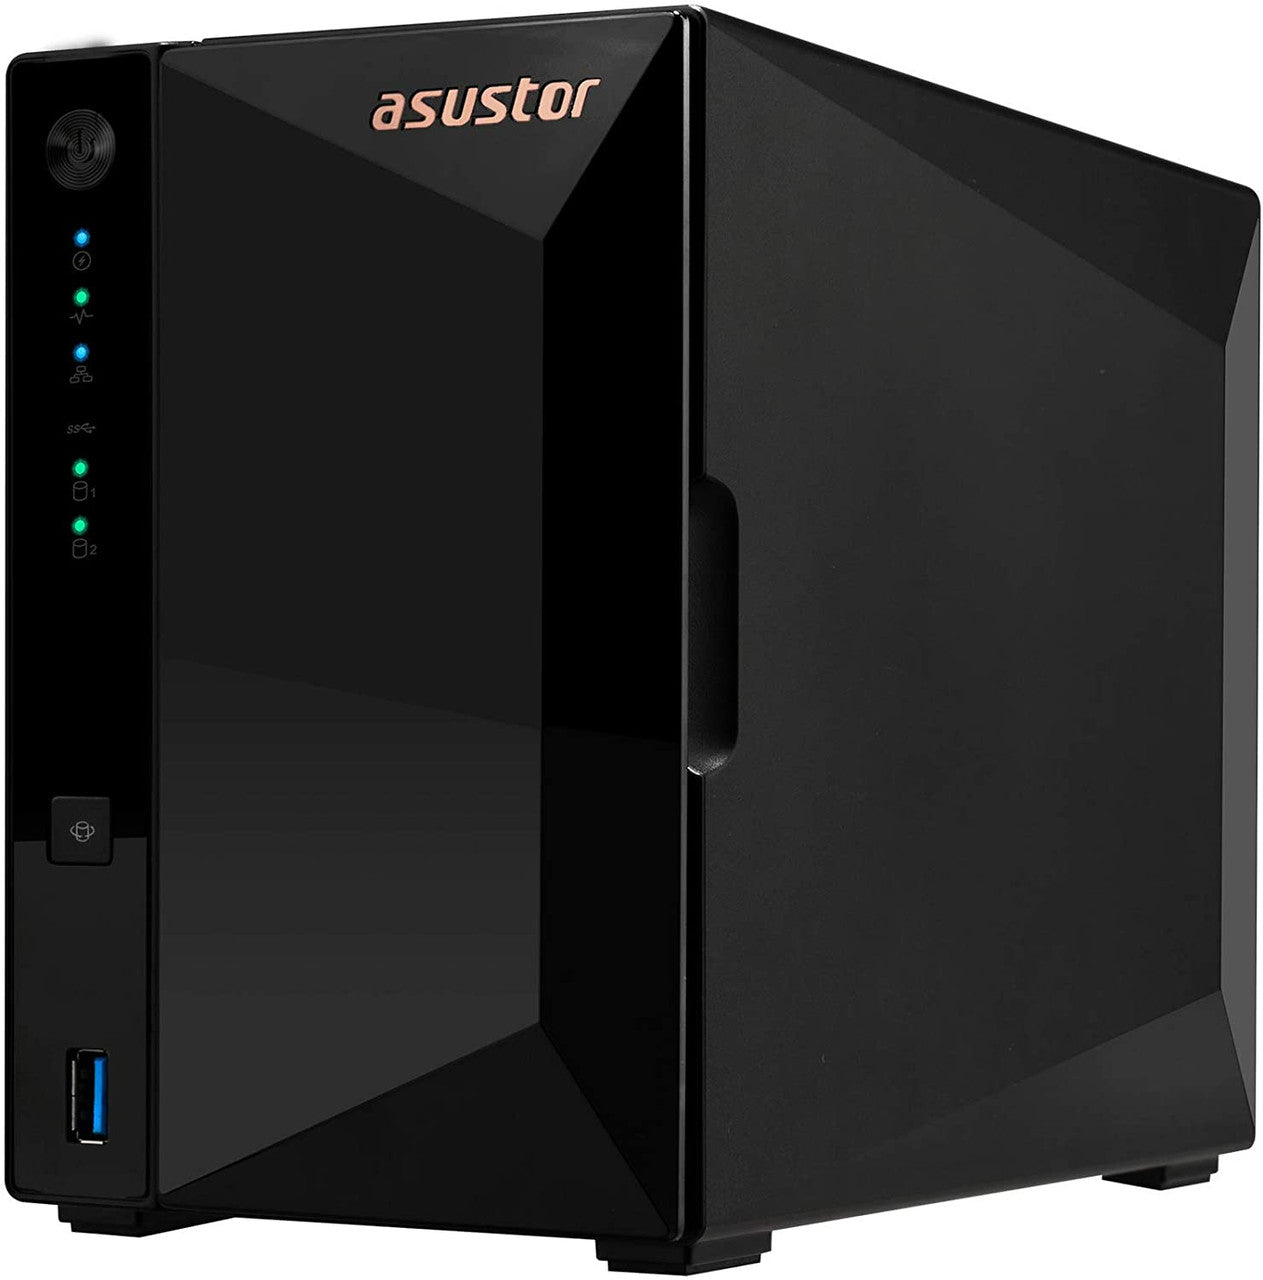 Asustor AS3302T 2-Bay Drivestor 2 PRO NAS with 2GB RAM and 8TB (2x4TB) Western Digital RED PRO Drives Fully Assembled and Tested